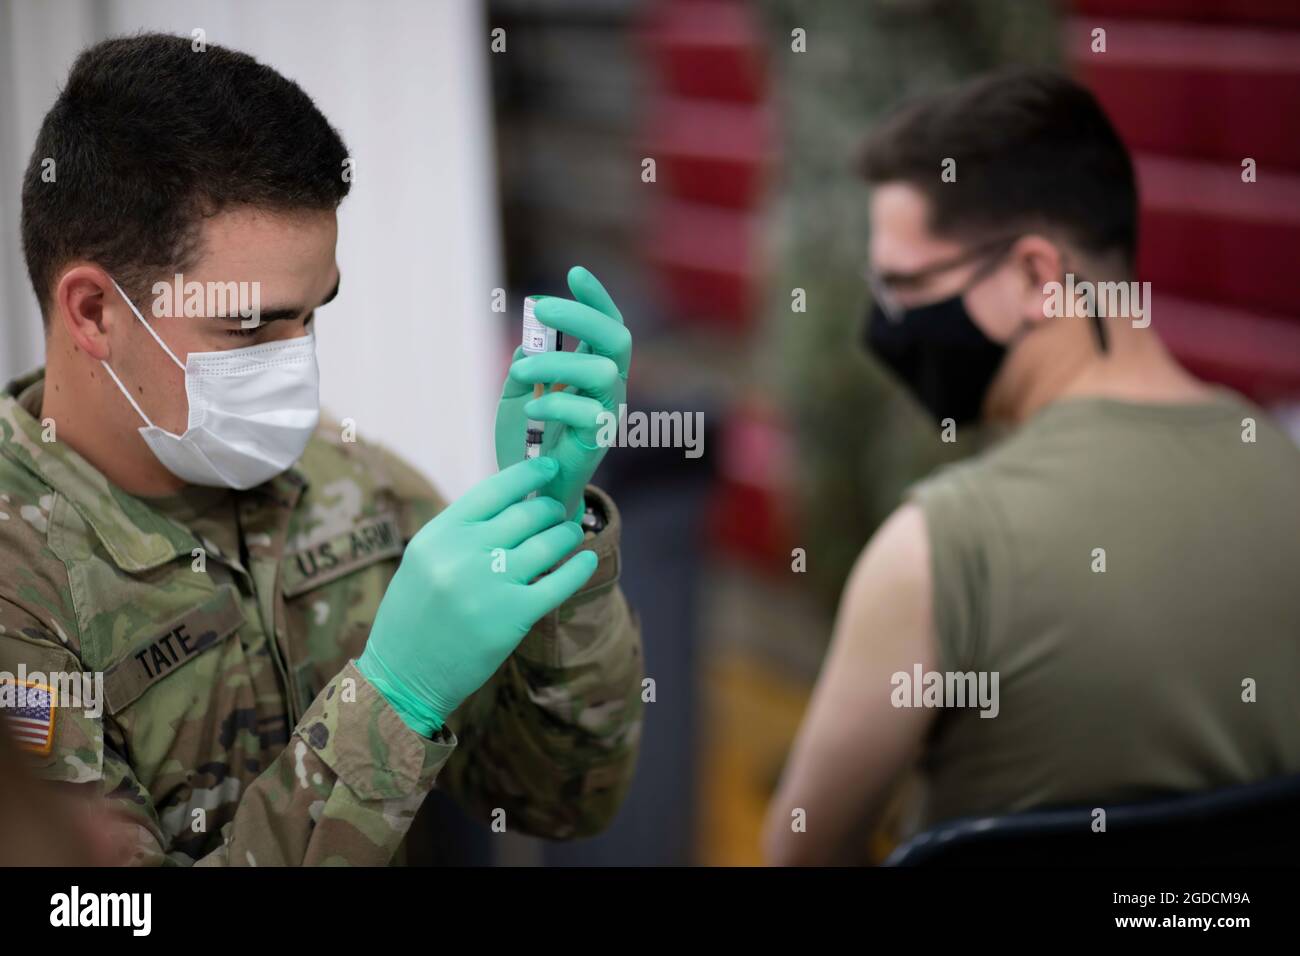 U.S. Army Pfc. Tanner Tate, assigned to the 627th Hospital Center out of Fort Carson, Colo., prepares to administer a COVID vaccine to a fellow Soldier at a state-run, federally-supported Community Vaccination Center in Elizabeth, N.J.. U.S. Northern Command, through U.S. Army North, remains committed to providing continued, flexible Department of Defense support to the Federal Emergency Management Agency as part of the whole-of-government response to COVID-19. (U.S. Navy photo by Chief Mass Communication Specialist Barry Riley) Stock Photo